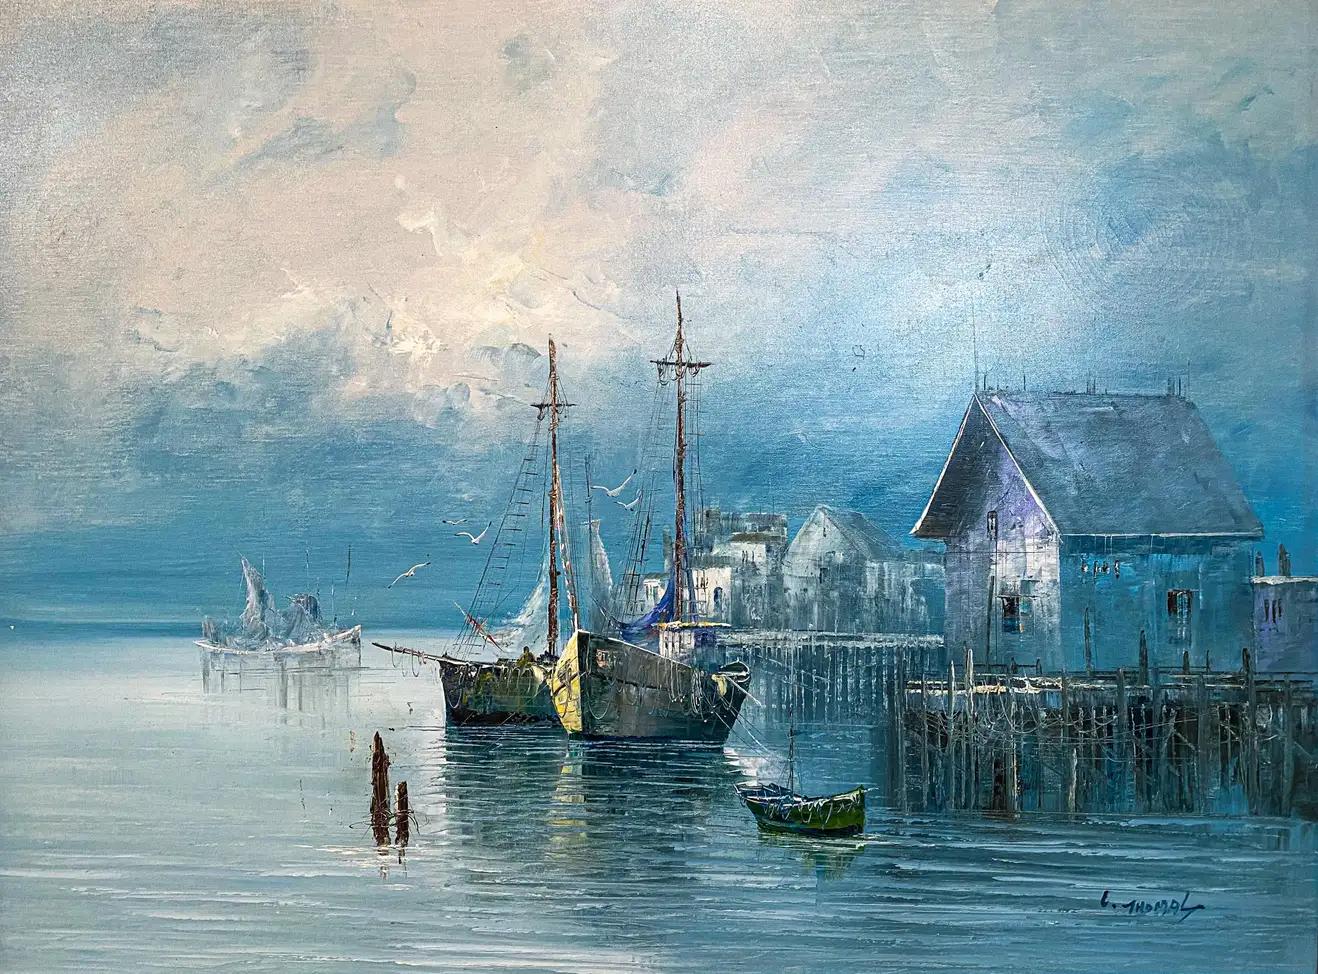 Large Marine Landscape Oil on Canvas Painting with Boats at a Dock, Signed - Gray Landscape Painting by James L. Thomas